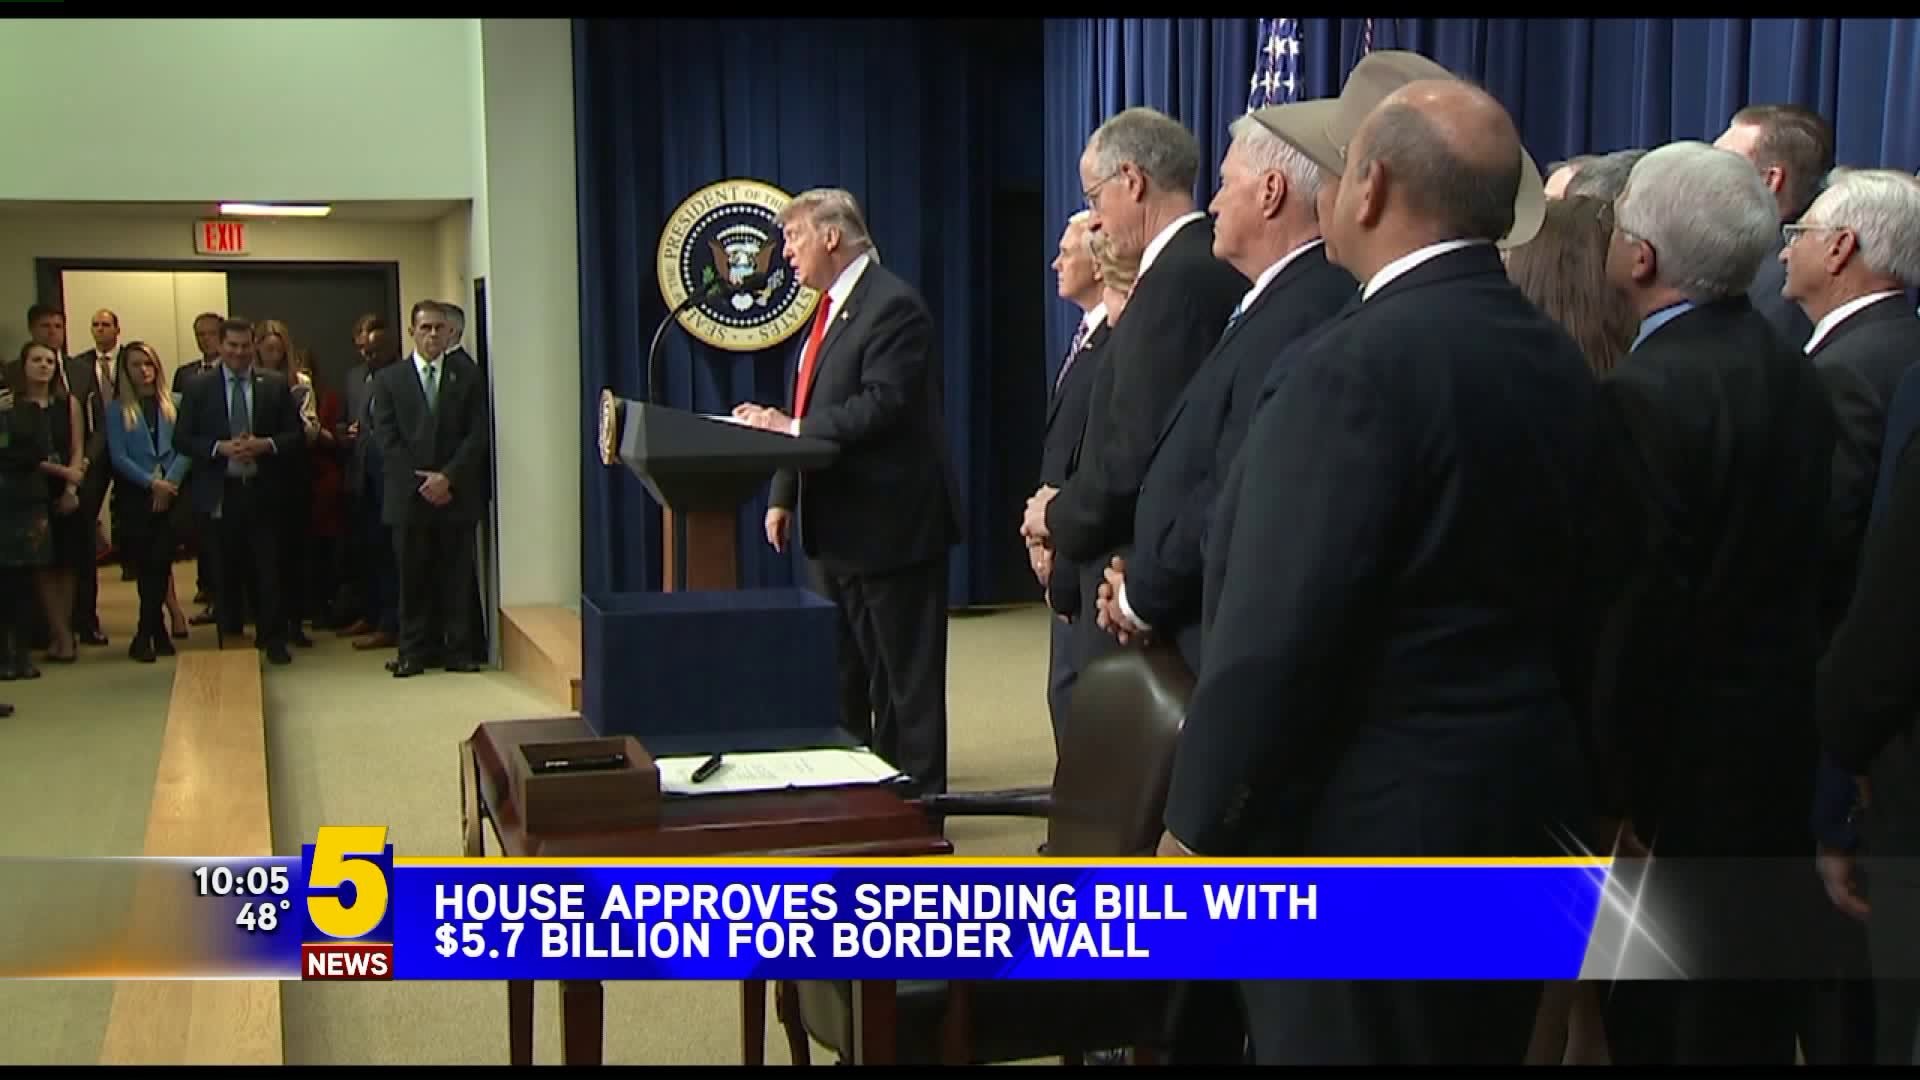 House Approves Spending Bill With $5.7 Billion for Border Wall